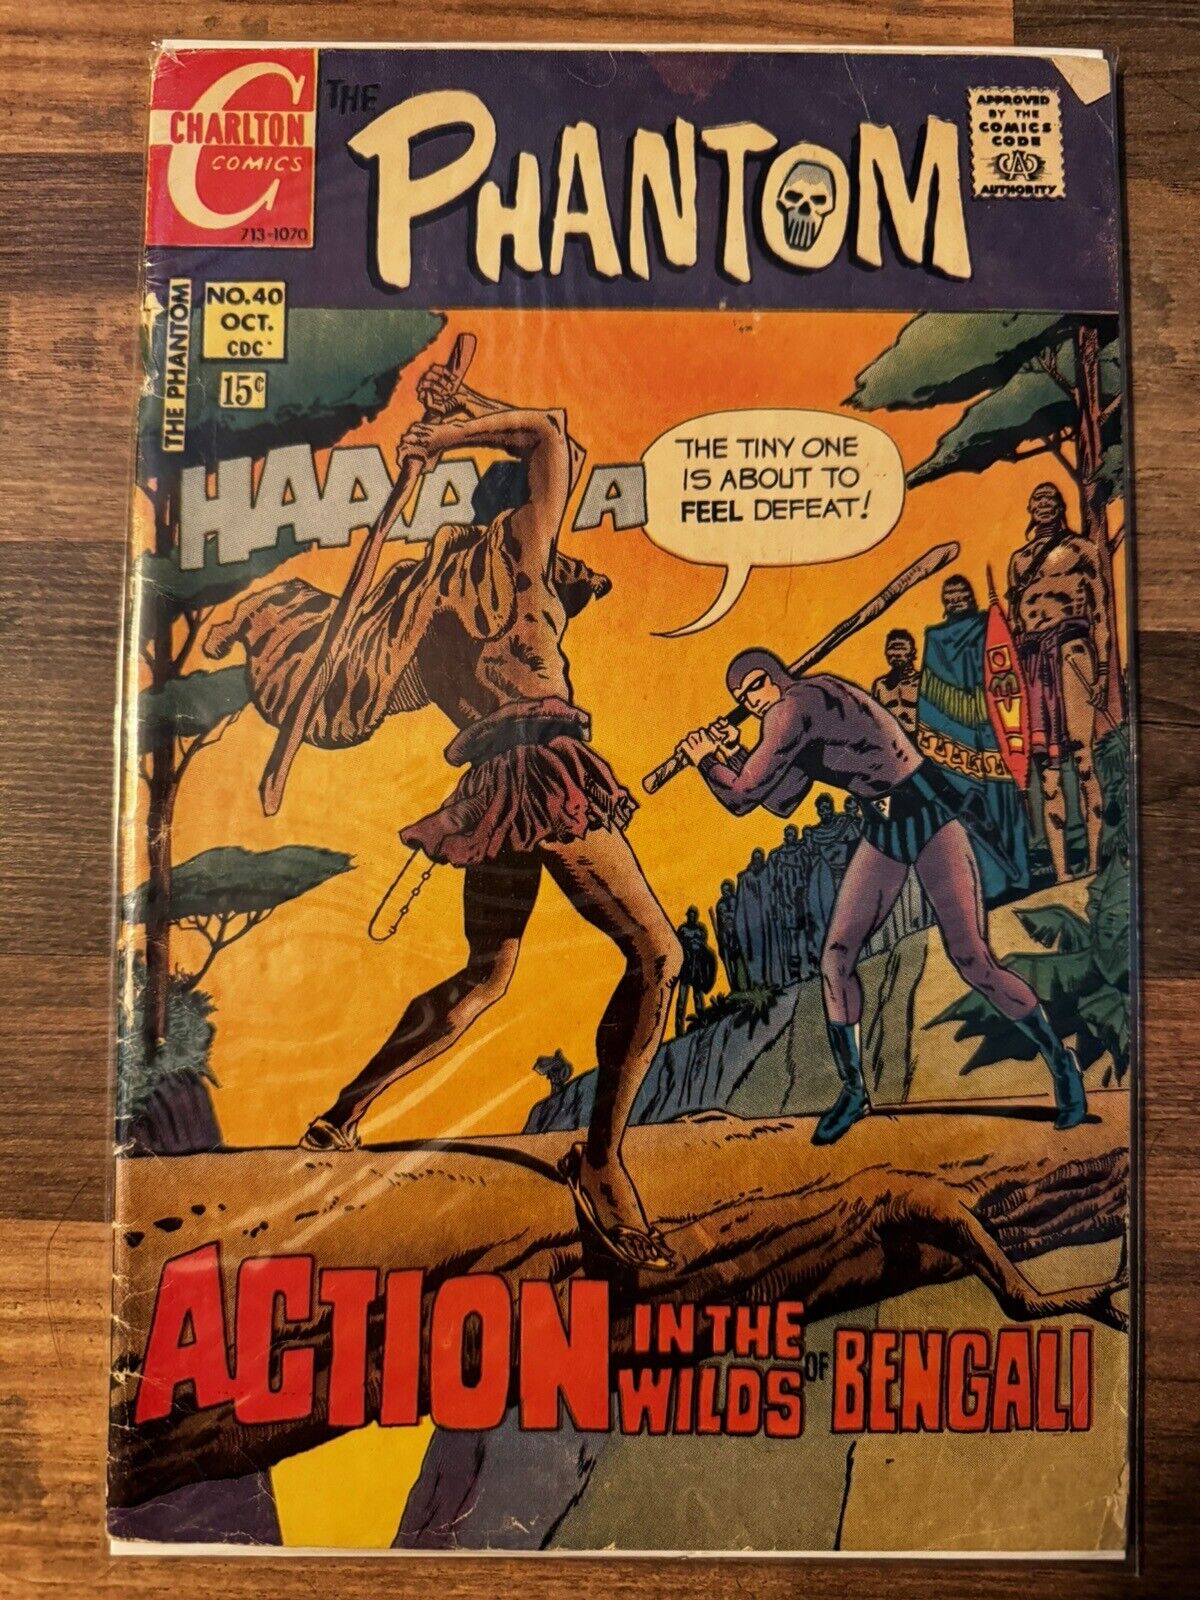 The Phantom #40 (Charlton 1970) "Action in the Wilds of Bengali" Comic Book